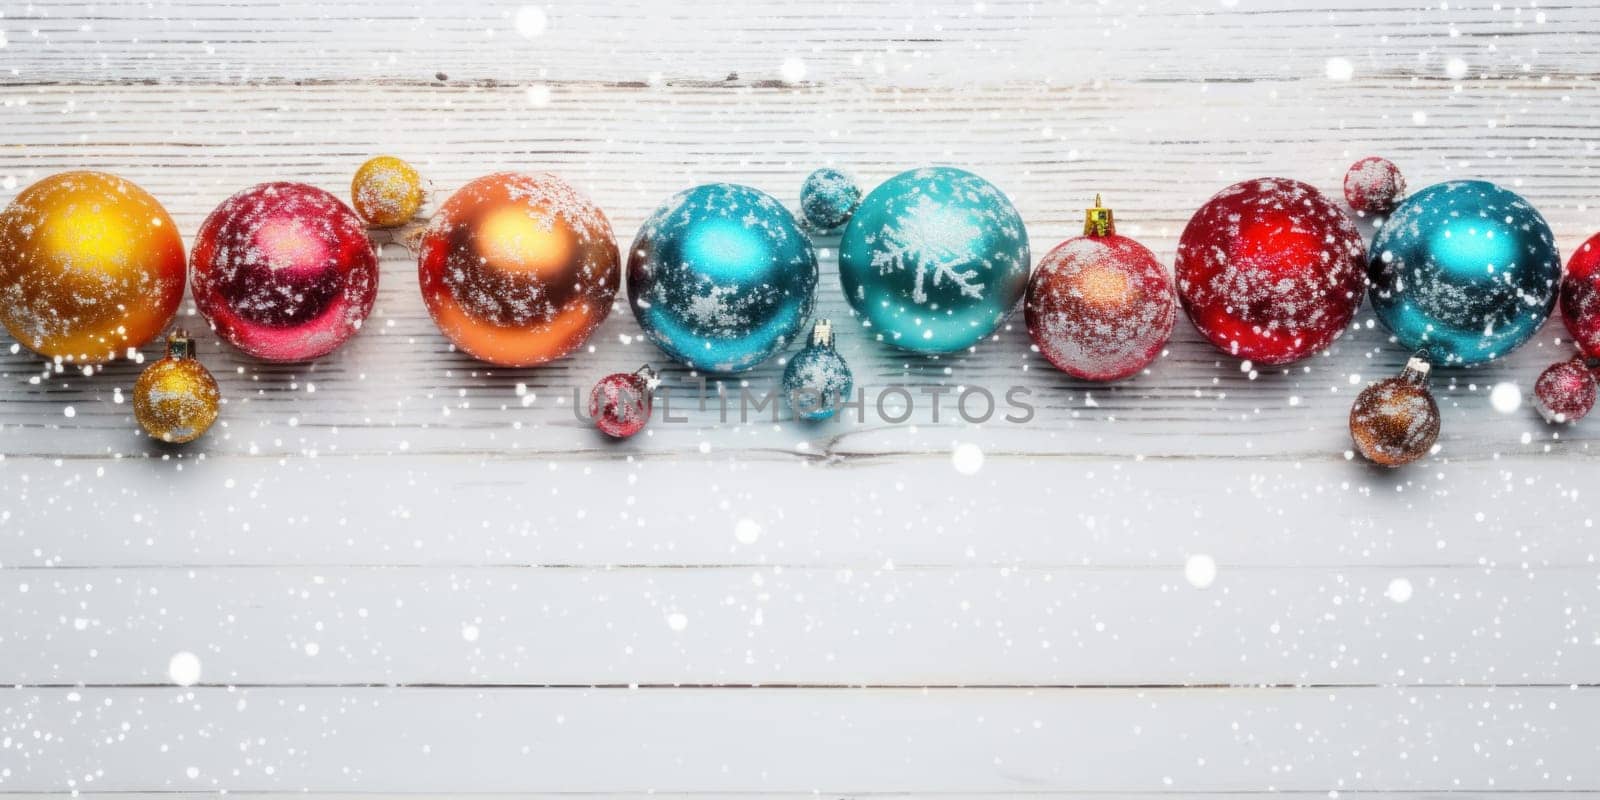 A row of colorful christmas ornaments on a wooden surface, AI by starush